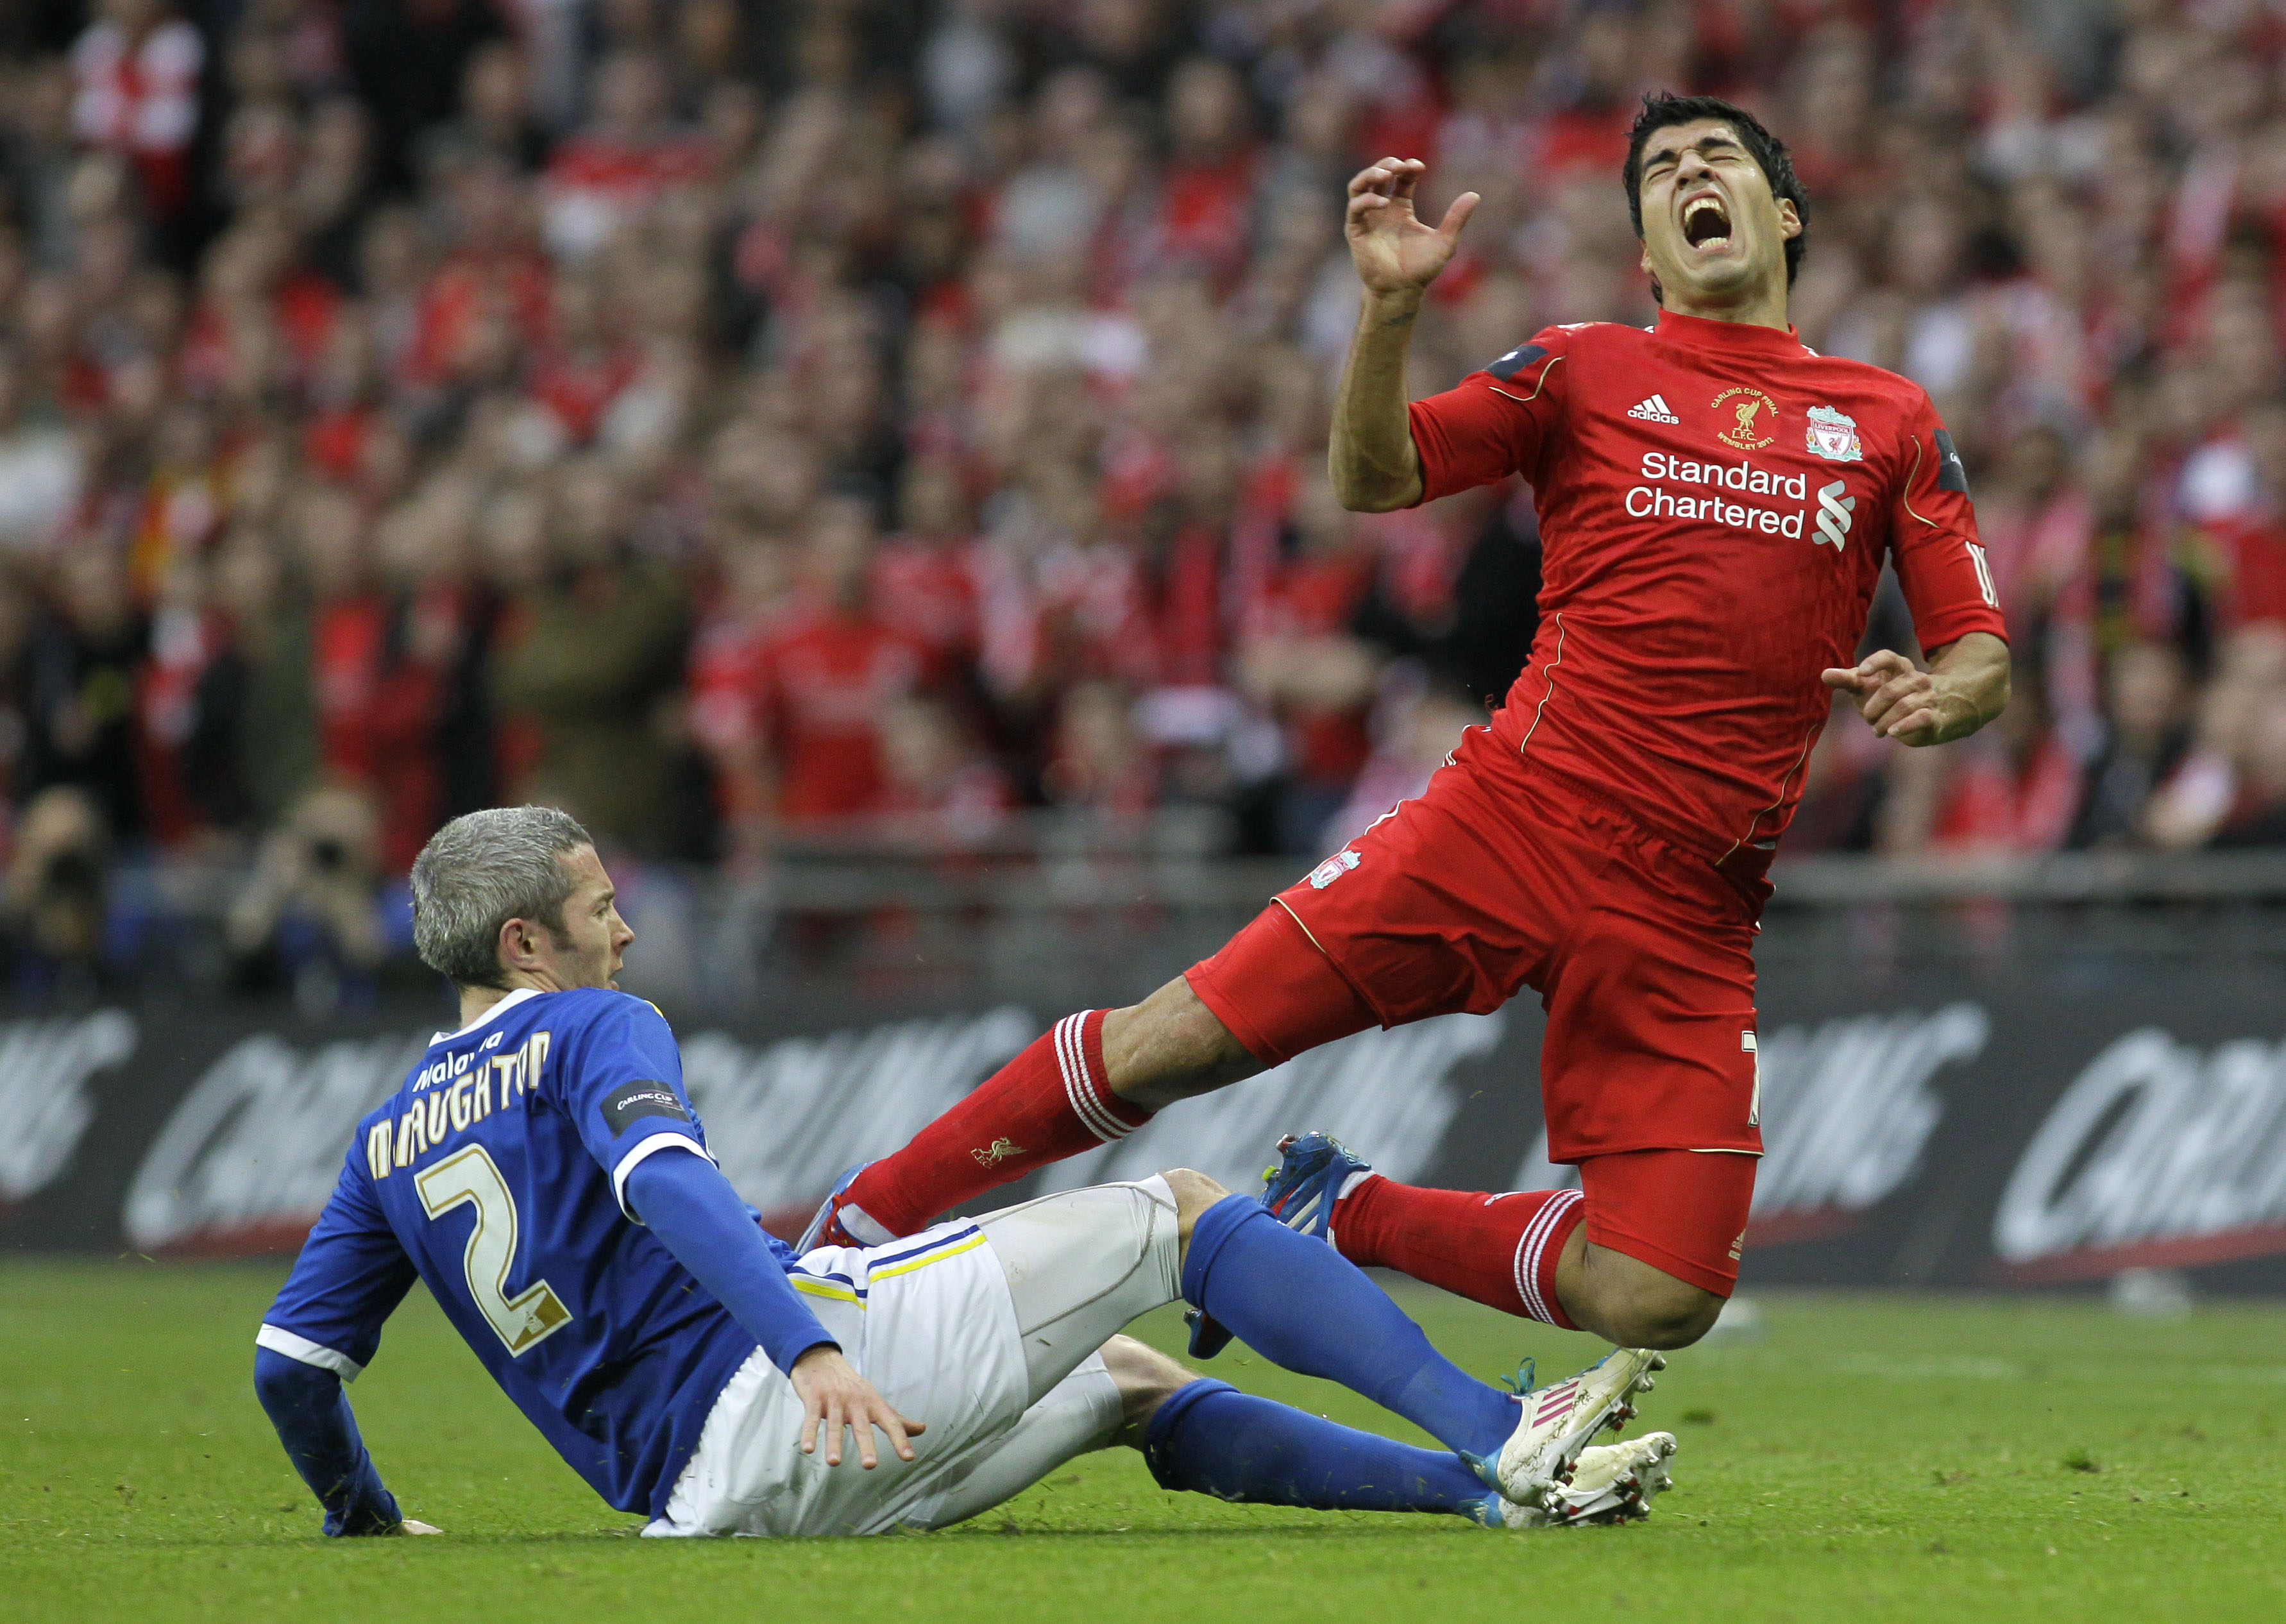 Cardiff, England, Carling Cup, Liverpool, Final